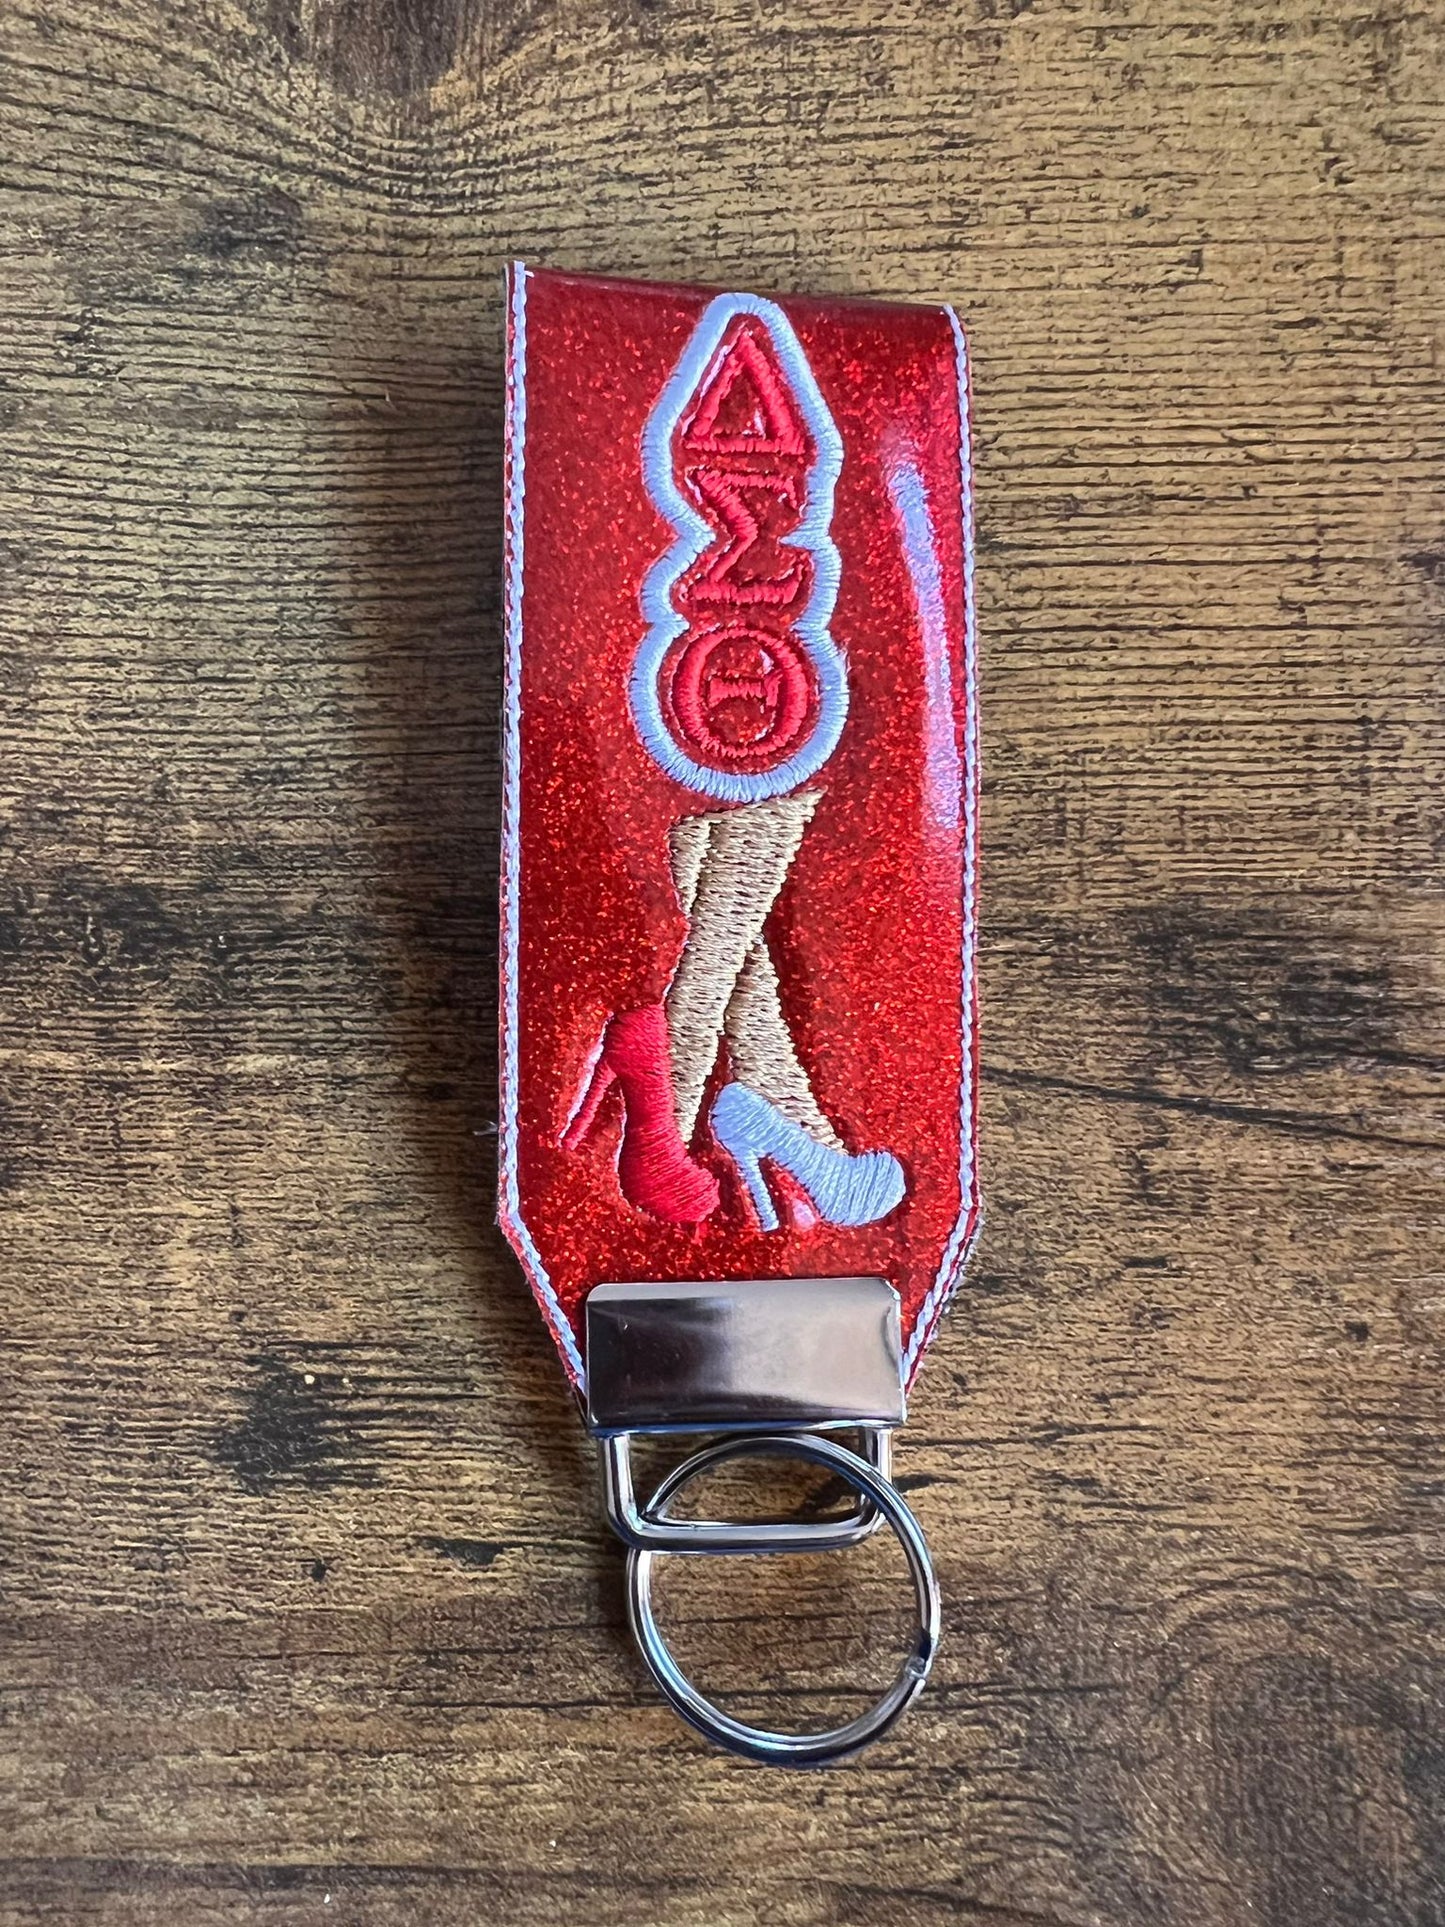 DST Red Looped KeyChain (Tan Legs)  BUY NOW